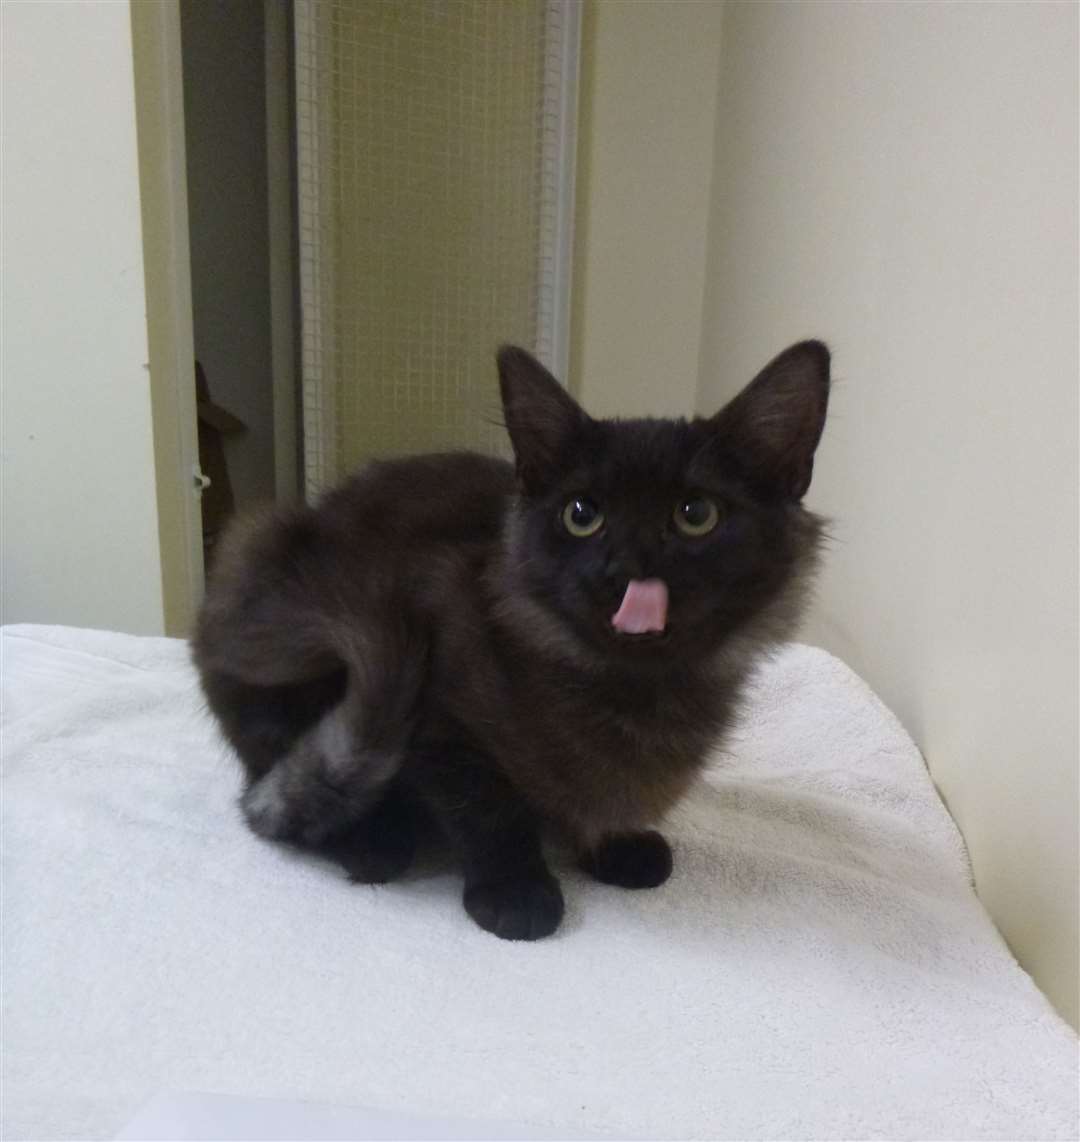 Chandrika, who is Midnight’s male kitten, after. Photo: RSPCA